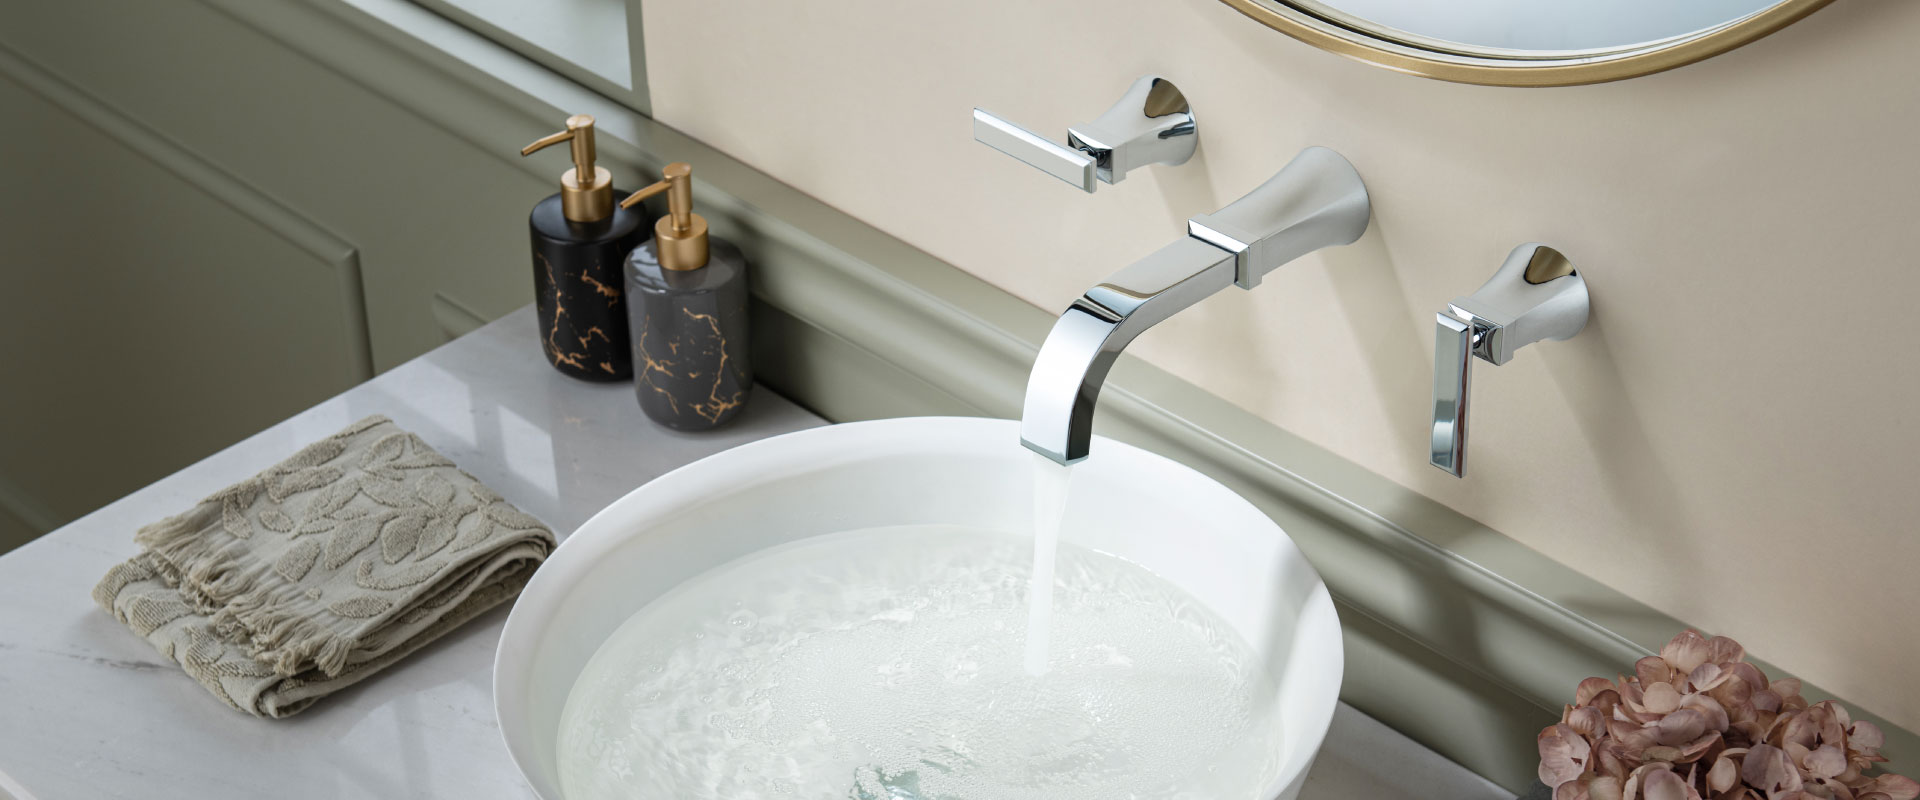 Transitional Wall Mount Faucet